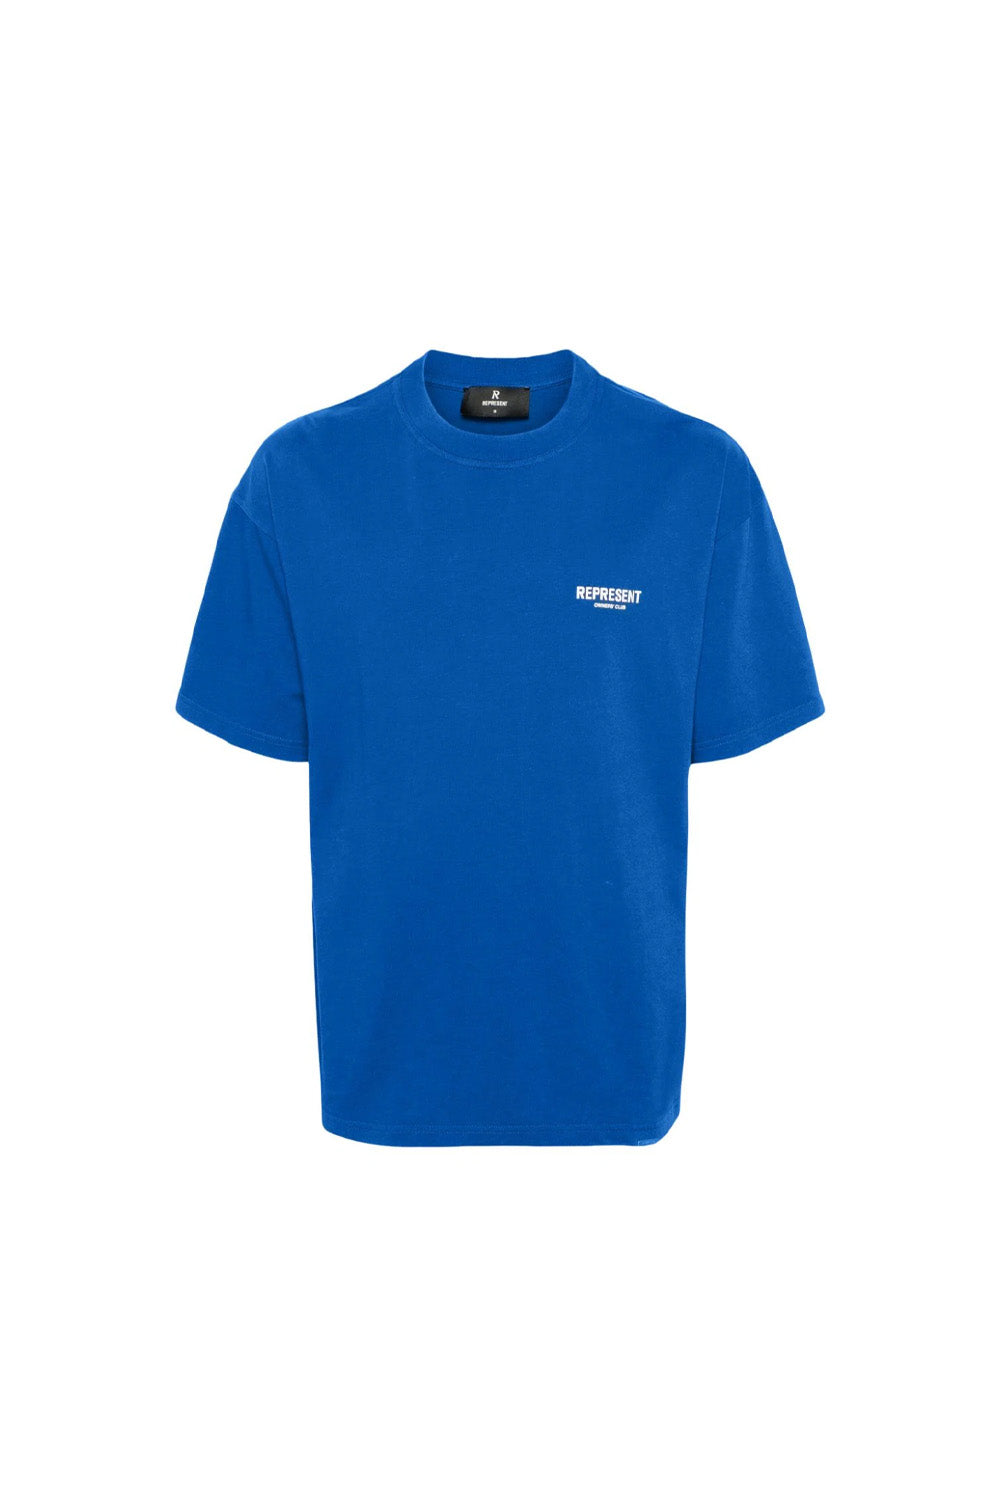 Represent Owners Club cotton T-shirt